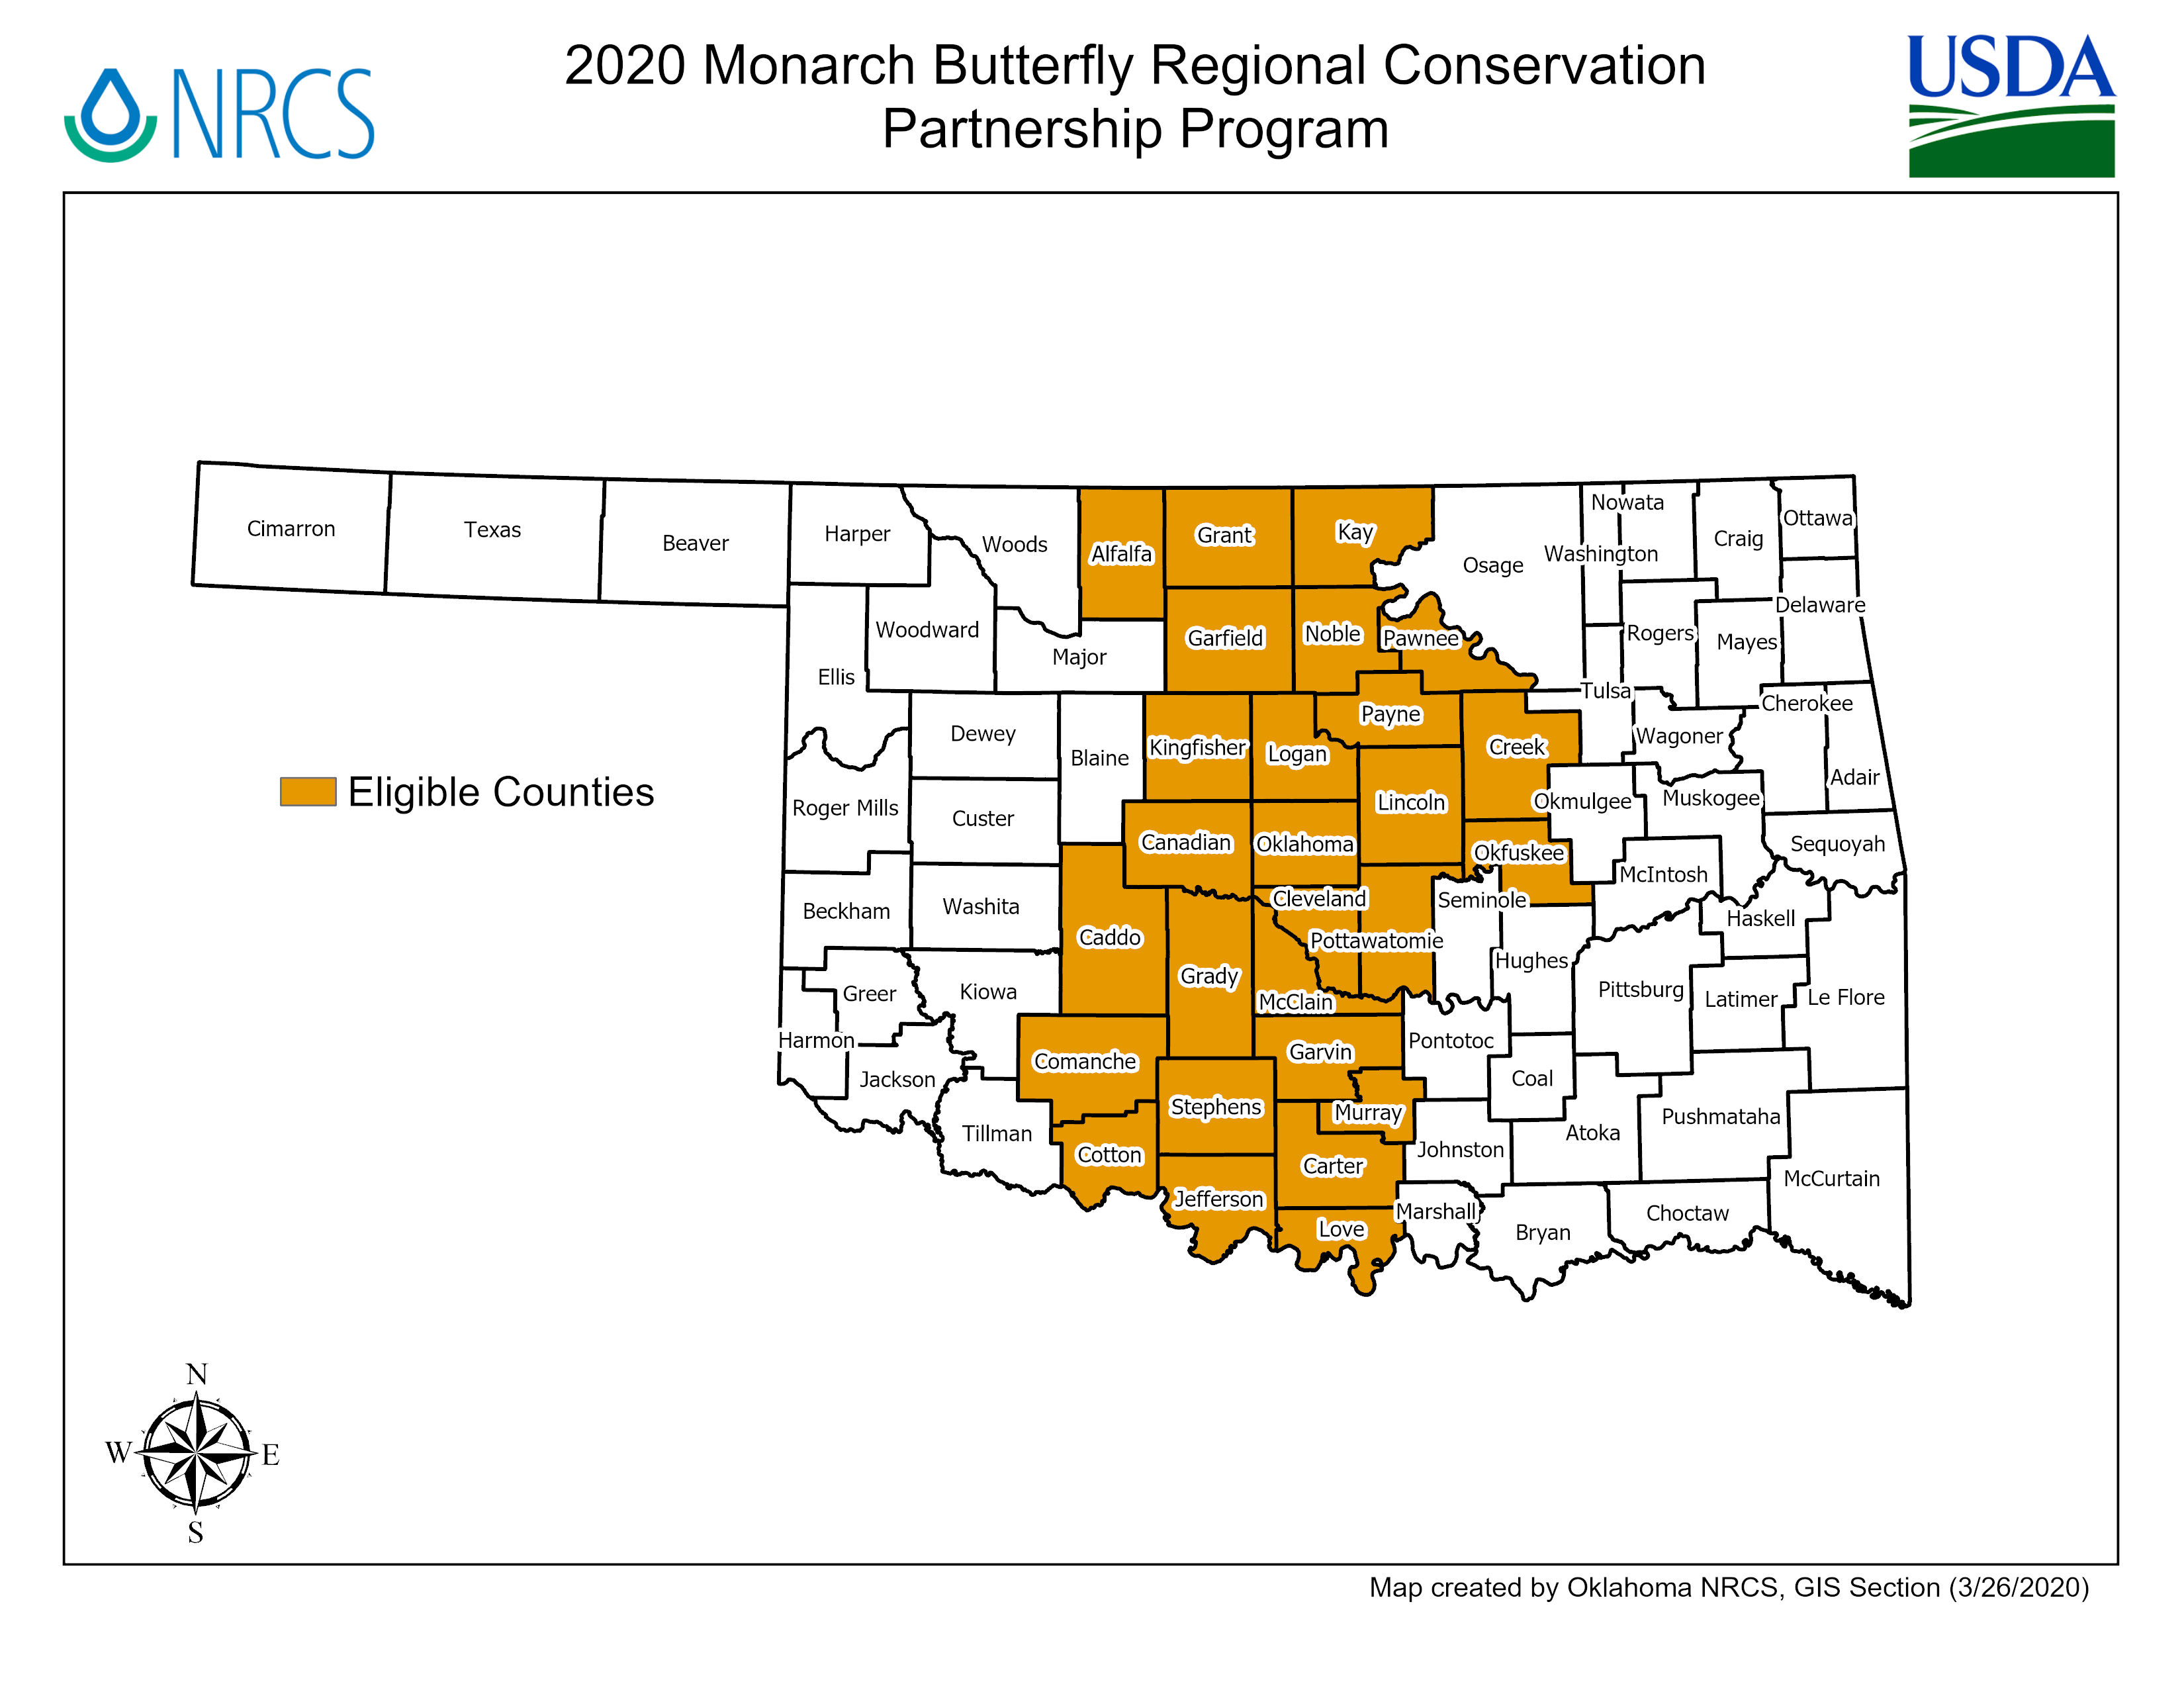 Oklahoma Producers Interested in Providing Habitat for Monarch Butterflies Should Look to USDA NRCS for Assistance